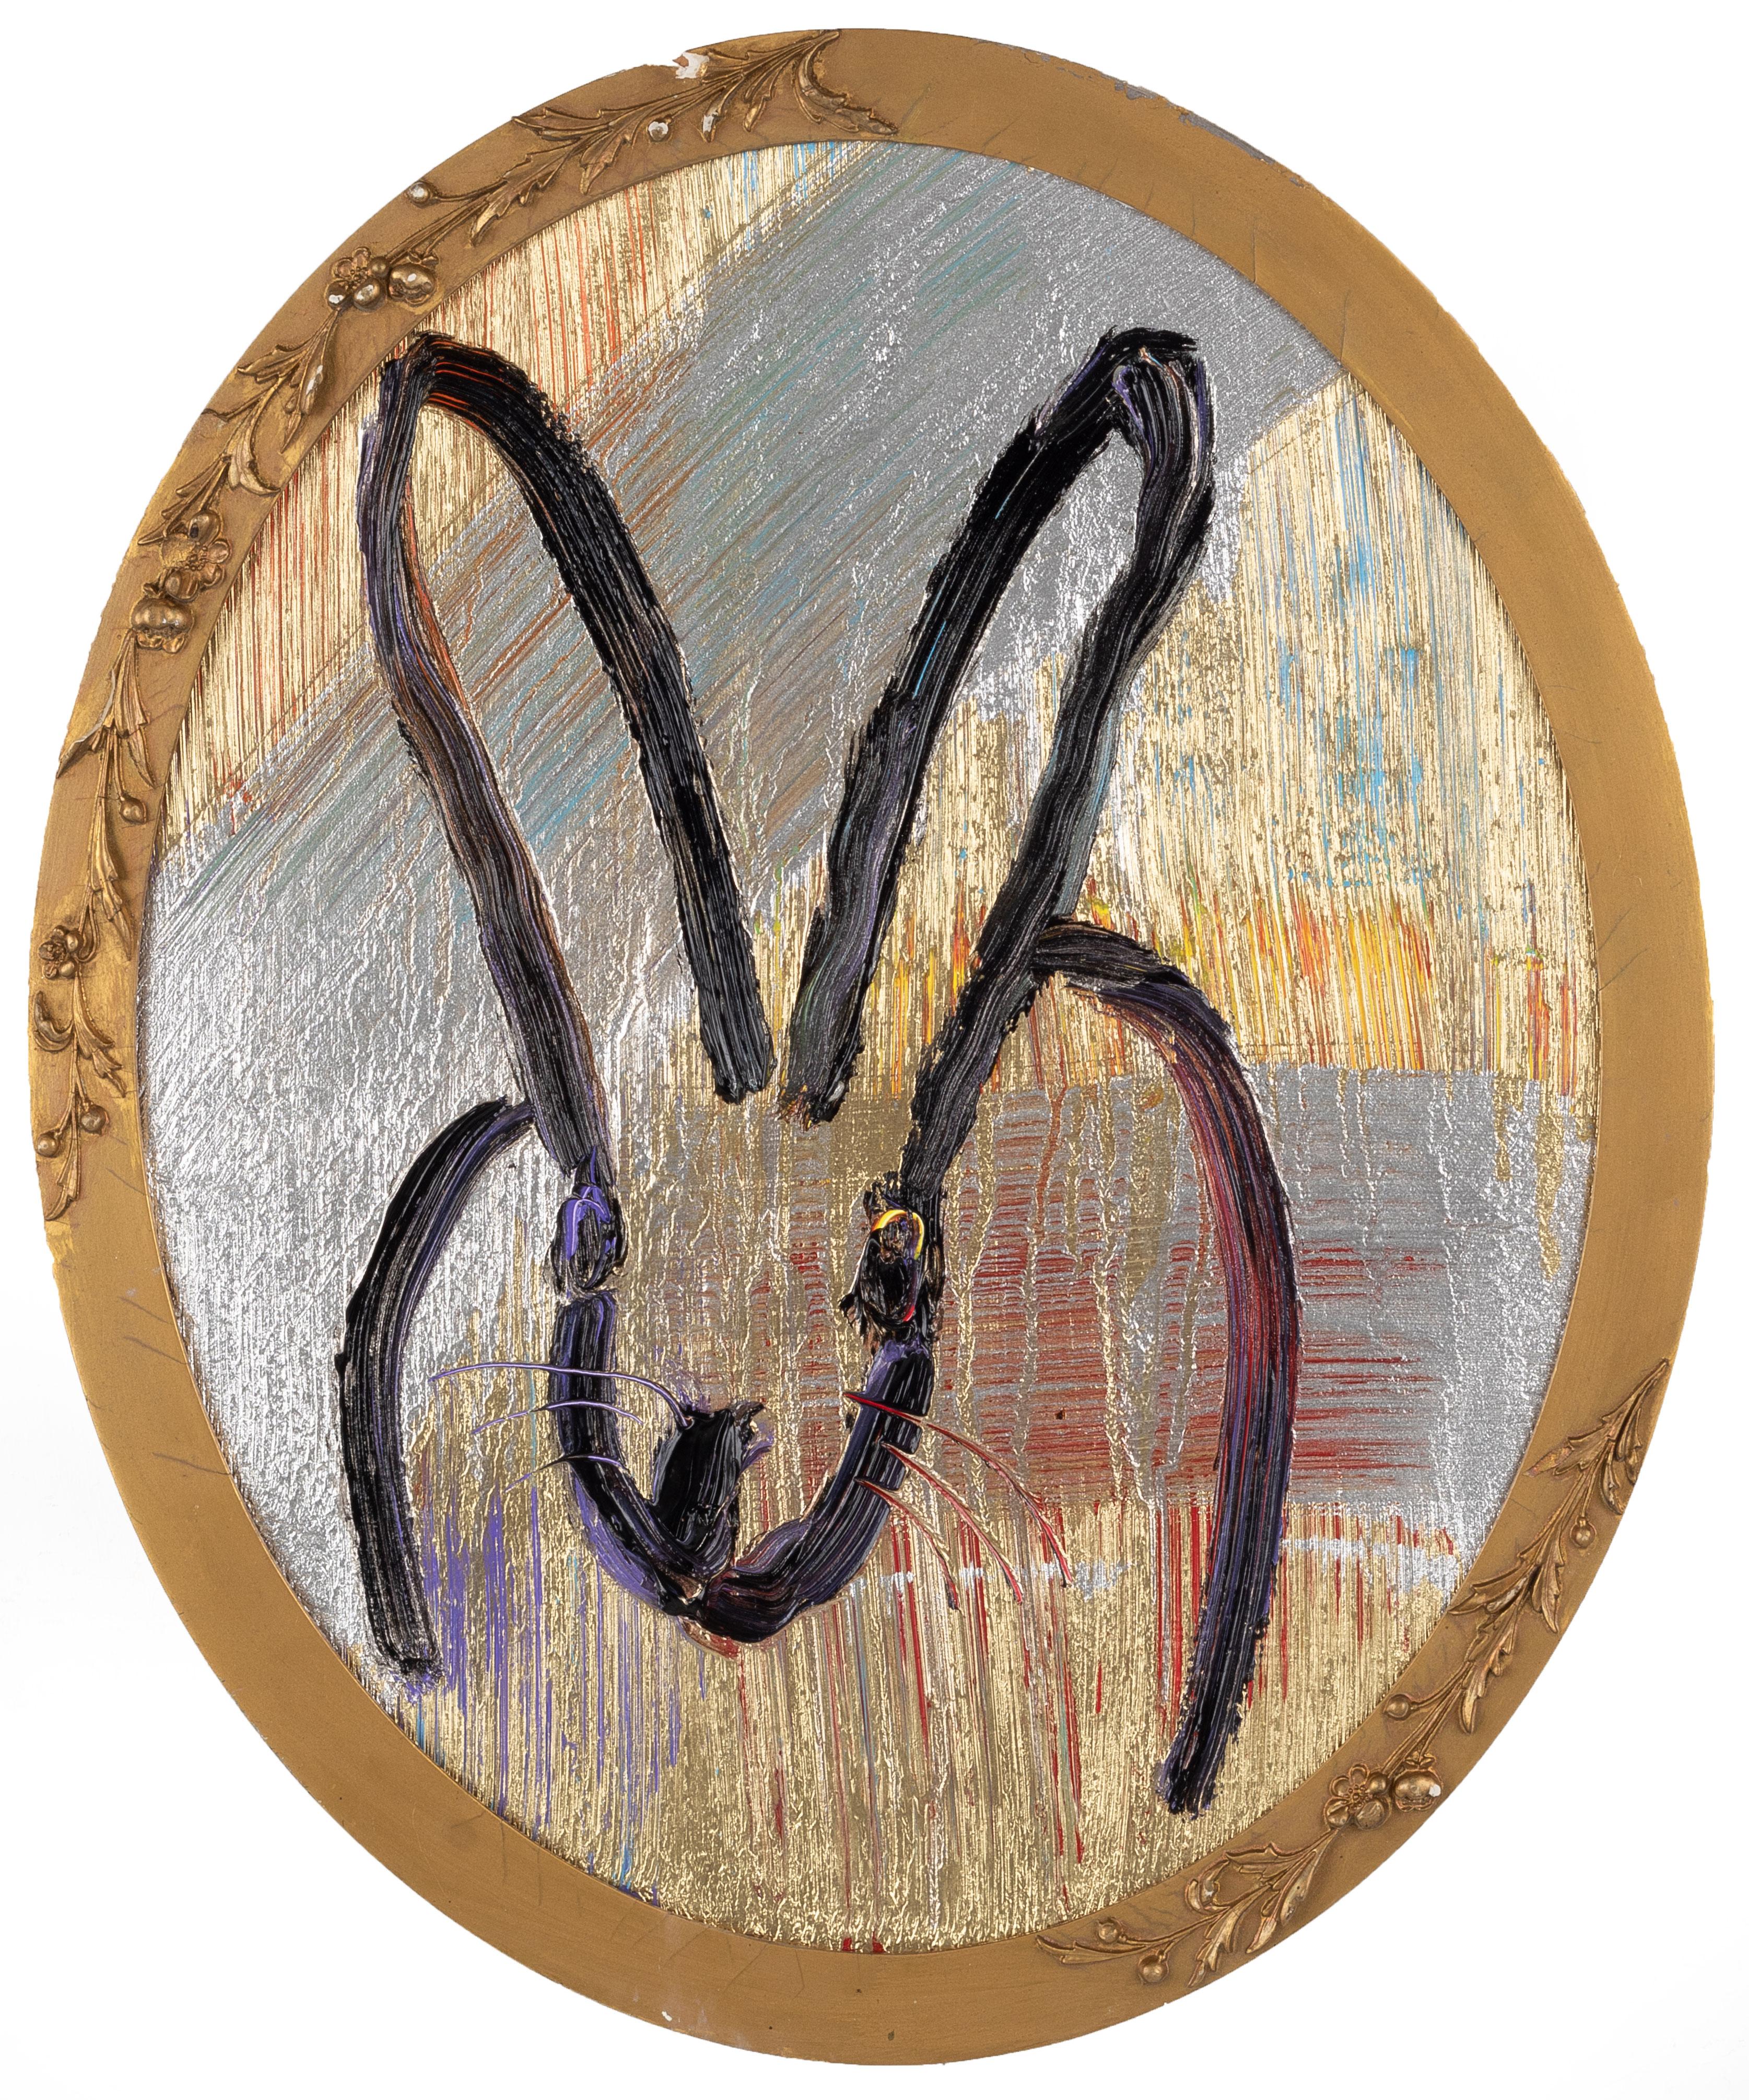 Oval Rainbow Bunny - Painting by Hunt Slonem